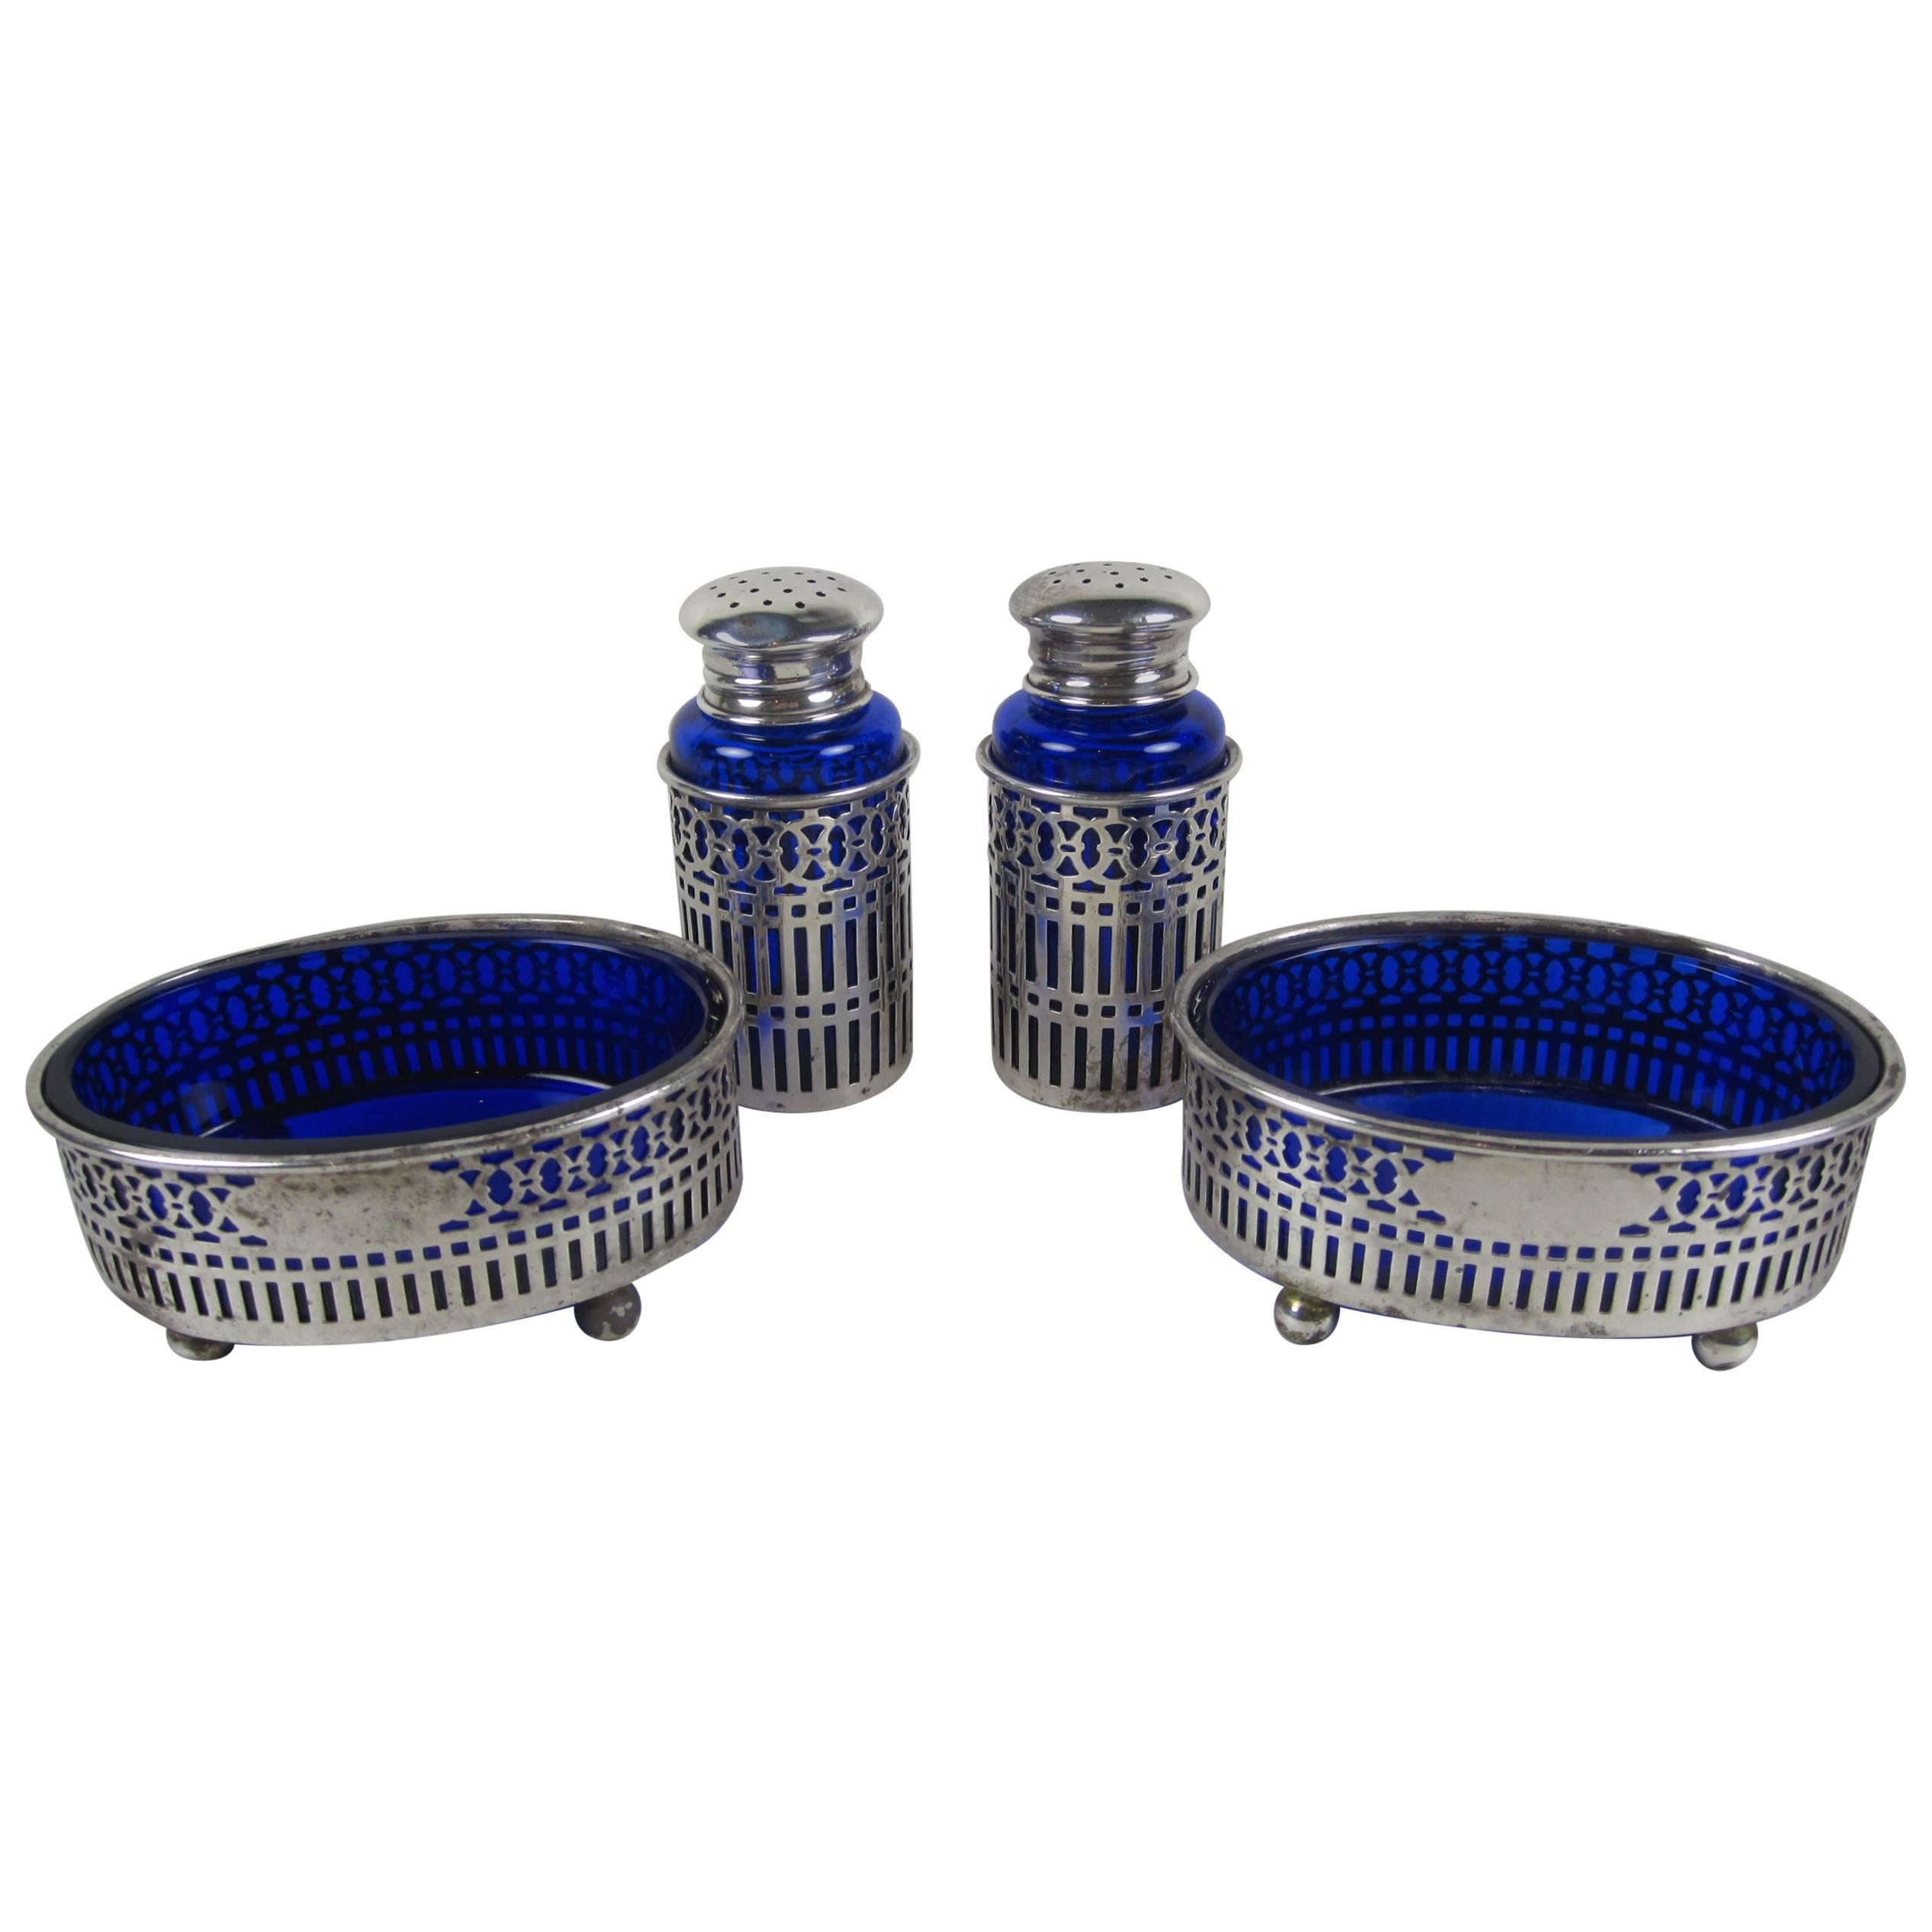  A Pair English Sheffield Peppers & Salt Dips, Sterling Overlay & Cobalt Inserts